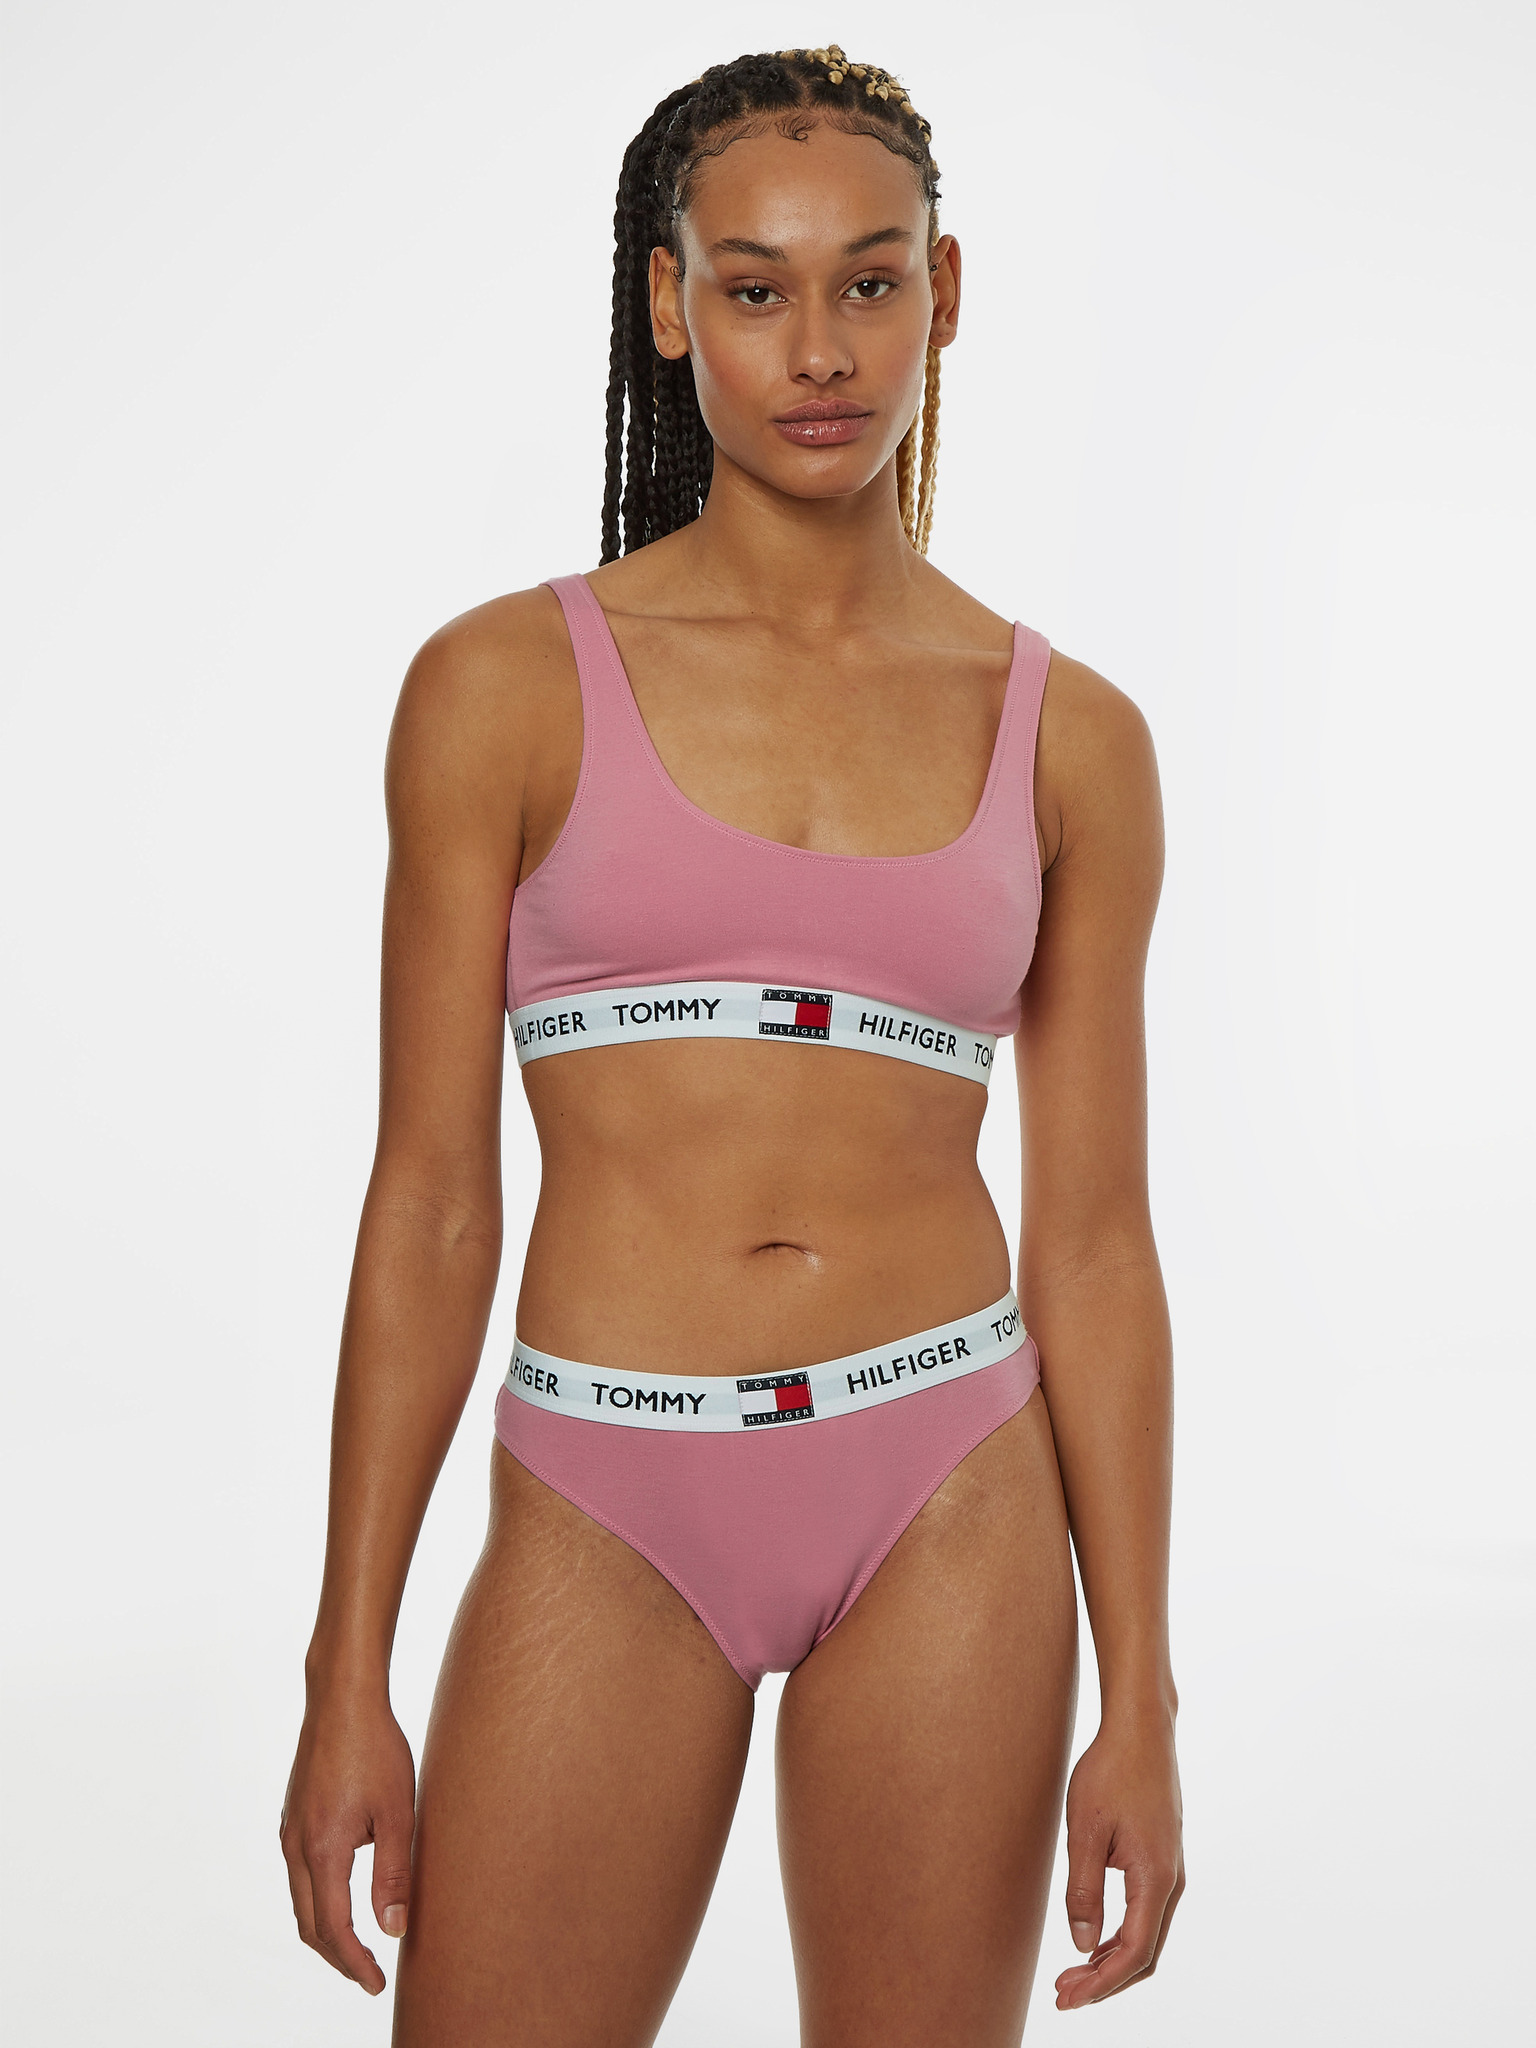 Tommy Hilfiger Bras sale - discounted price